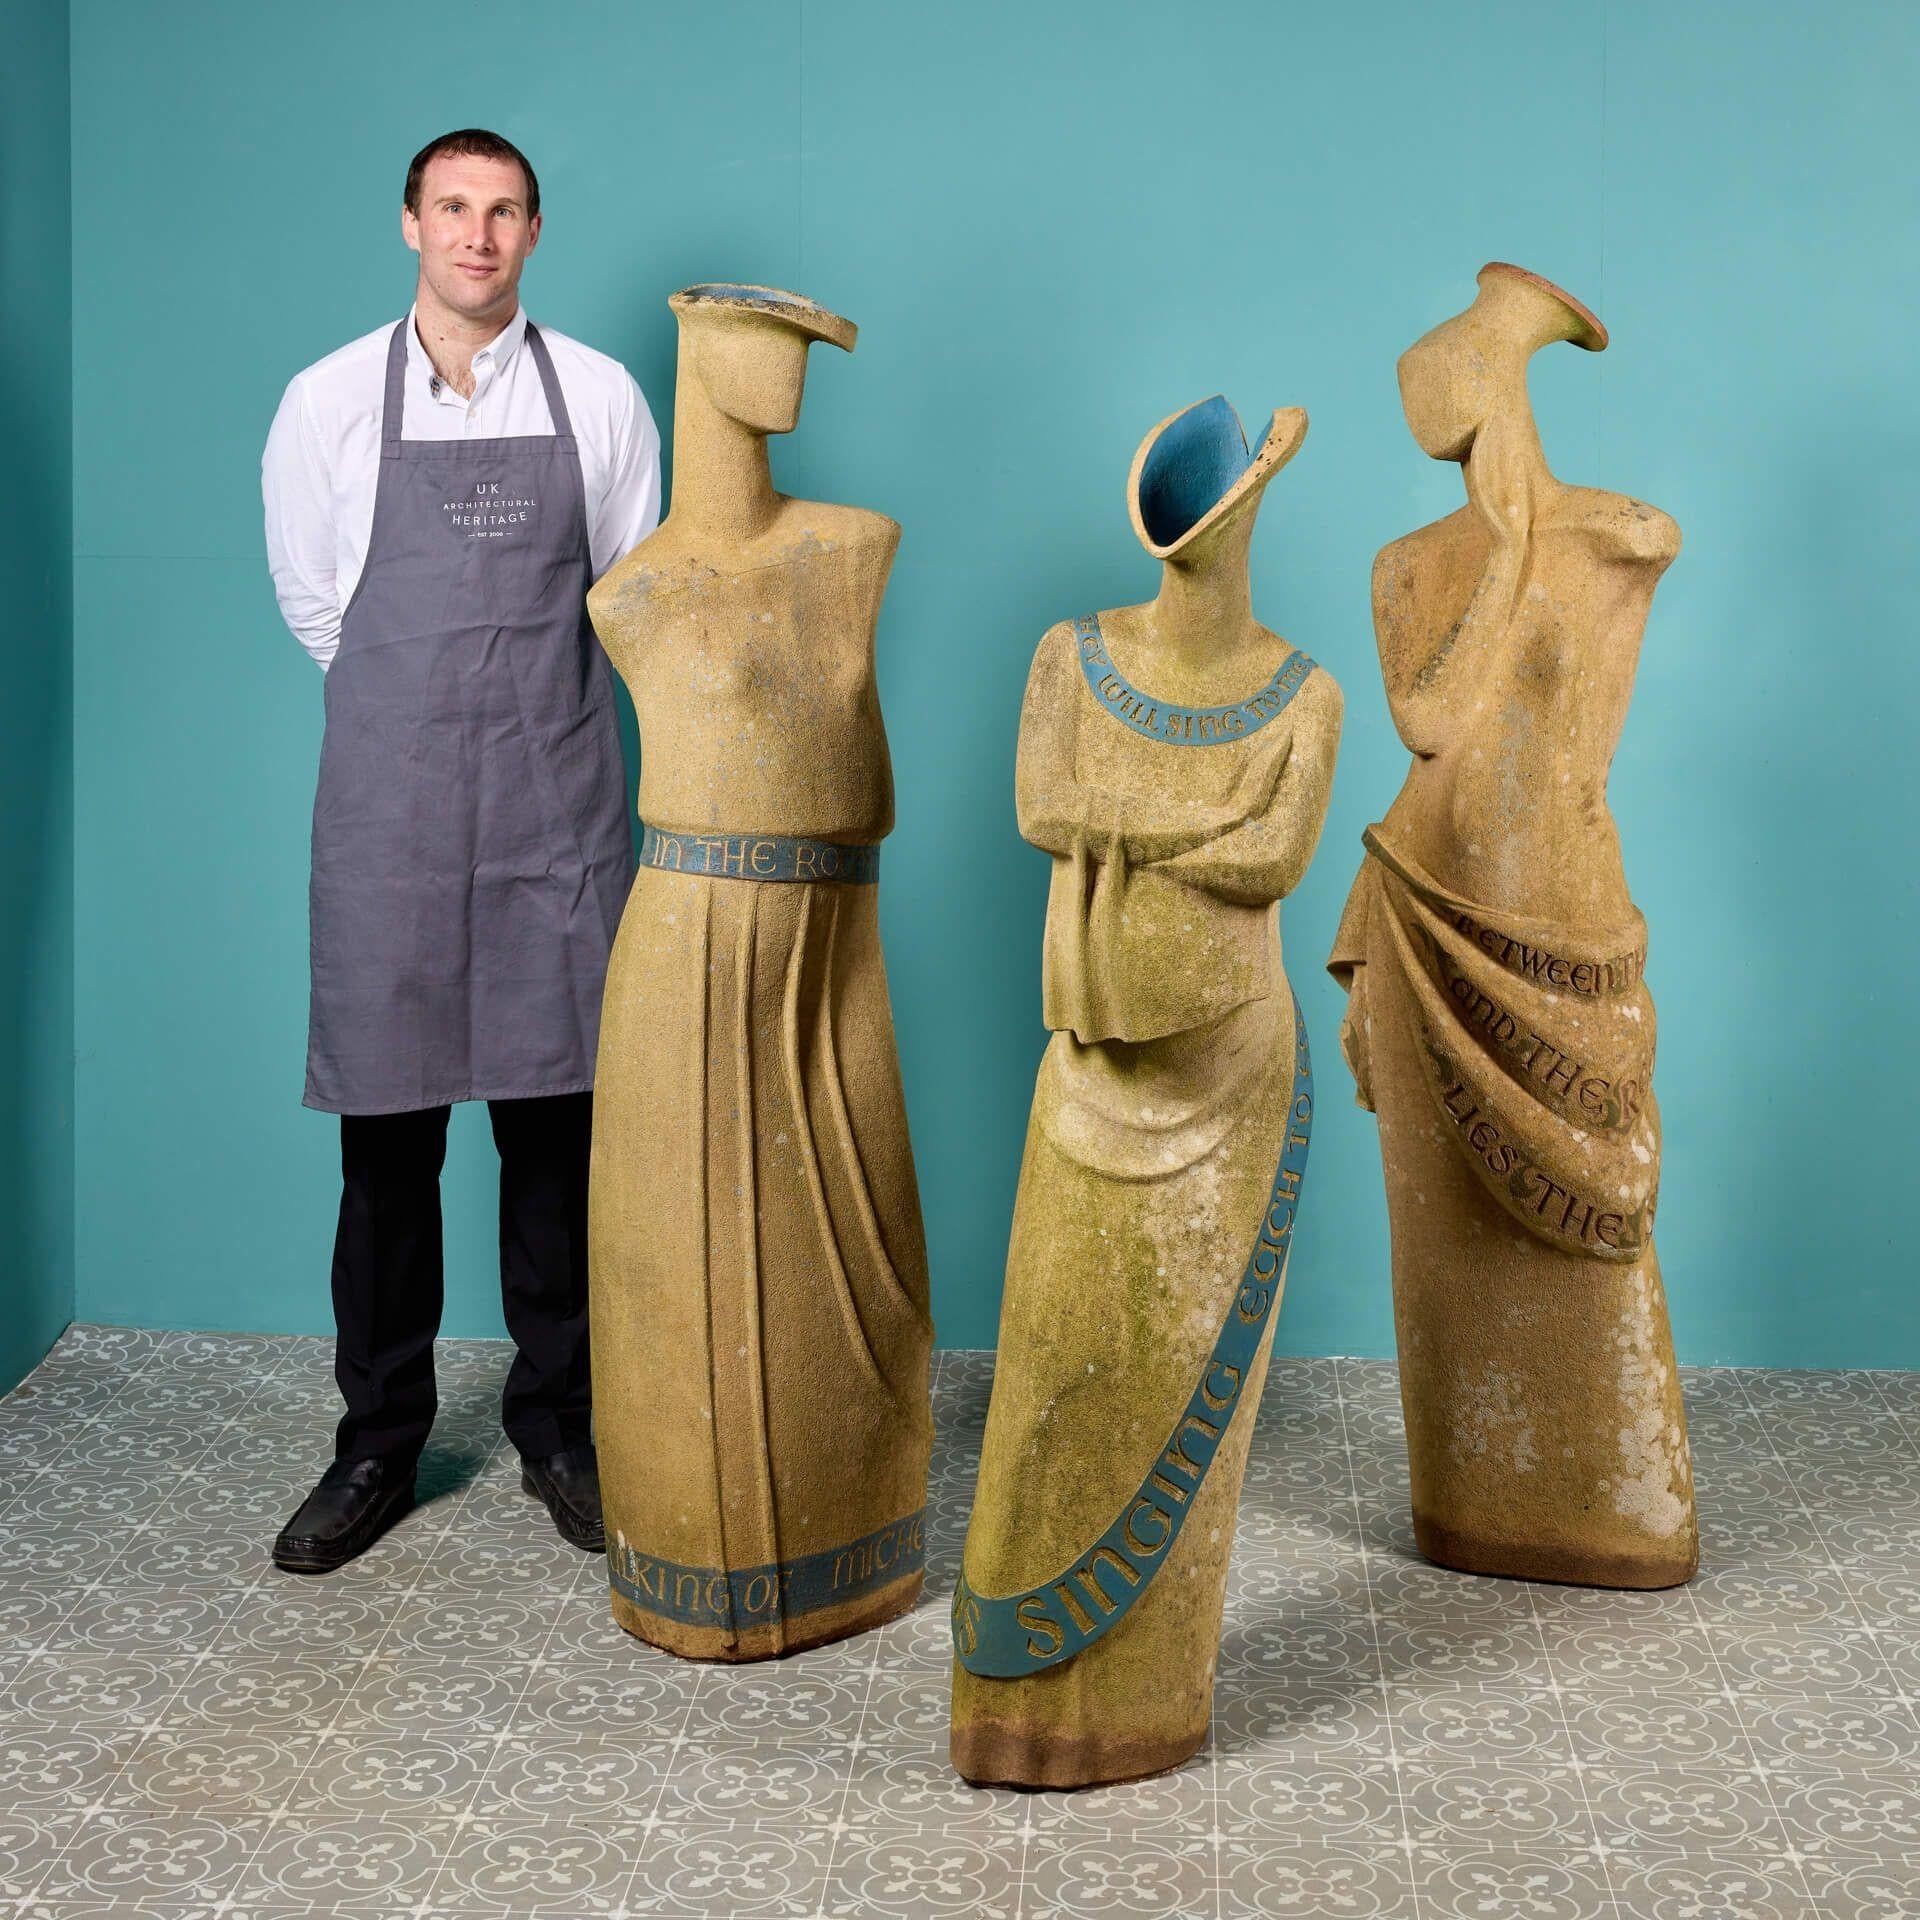 Introducing ‘The Gossips’; a set of 3 life-size figurative statues by dating from the 20th century by an unknown artist. The set depicts a trio of highly stylised, abstract female forms stood as if casually chatting. One stands with arms crossed